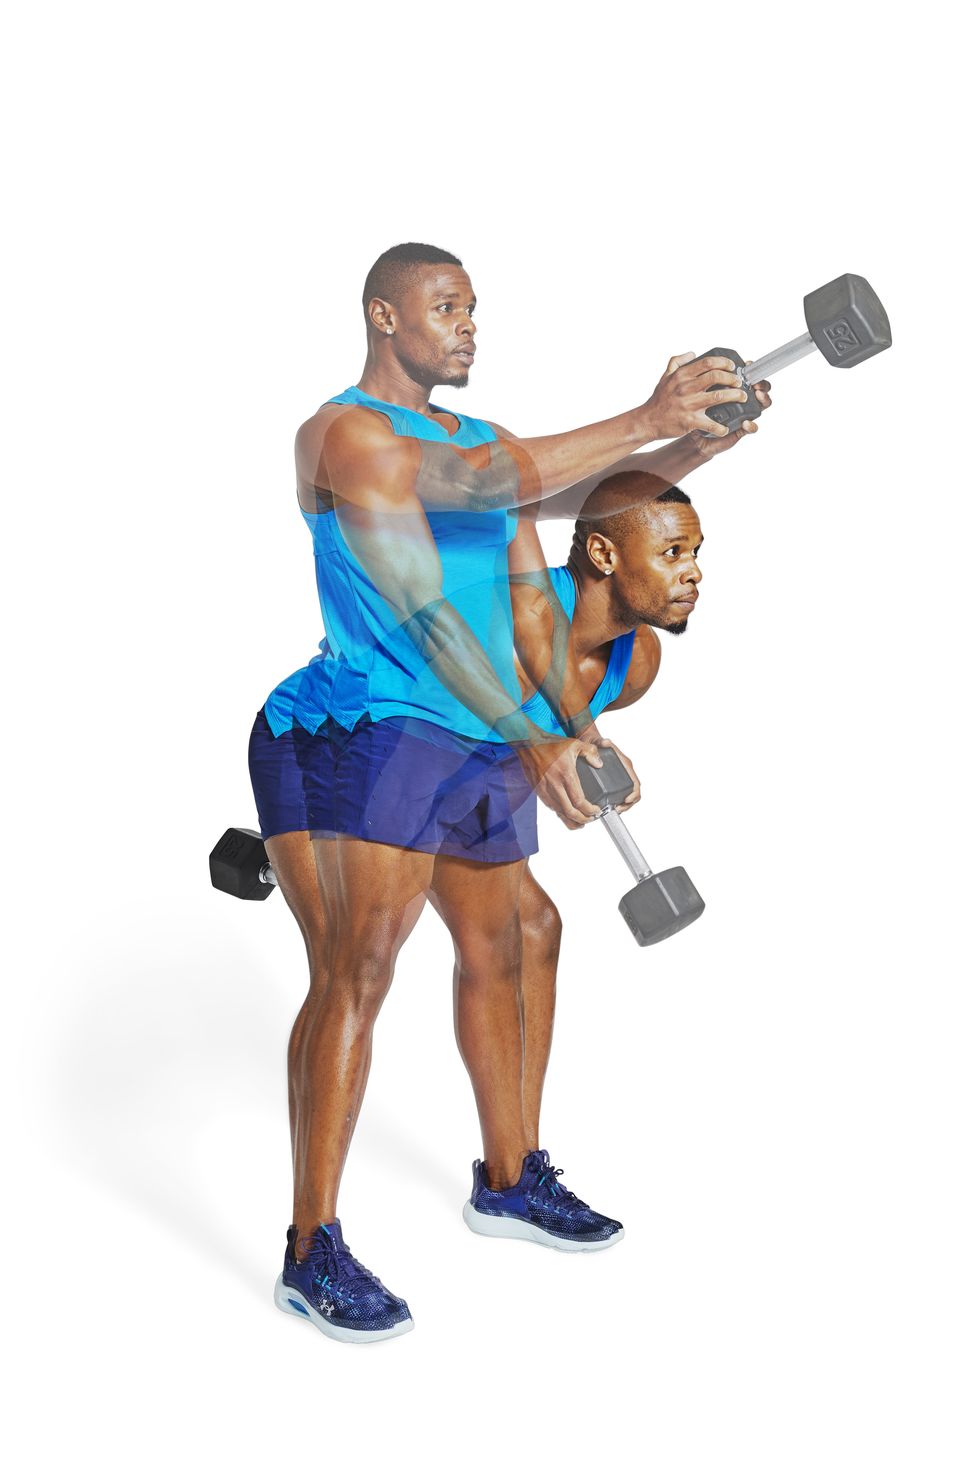 dumbbell swing muscle building, arms, strength, dumbbell exercise, workout